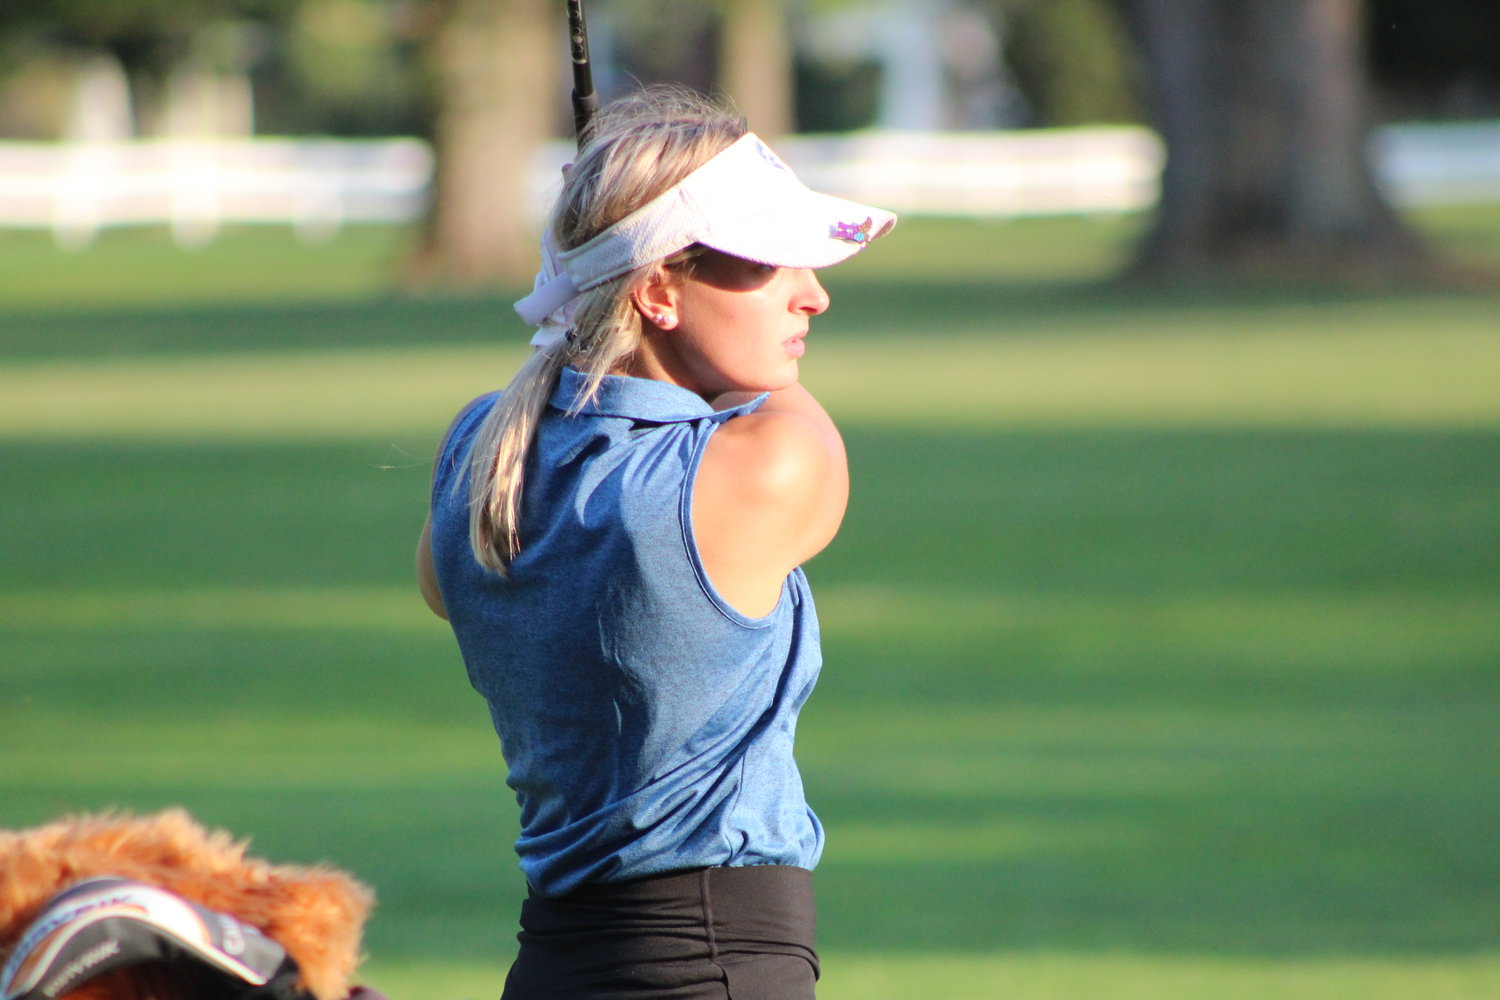 Crawfordsville's Sadie Walker stares down a shot as she ends her round.